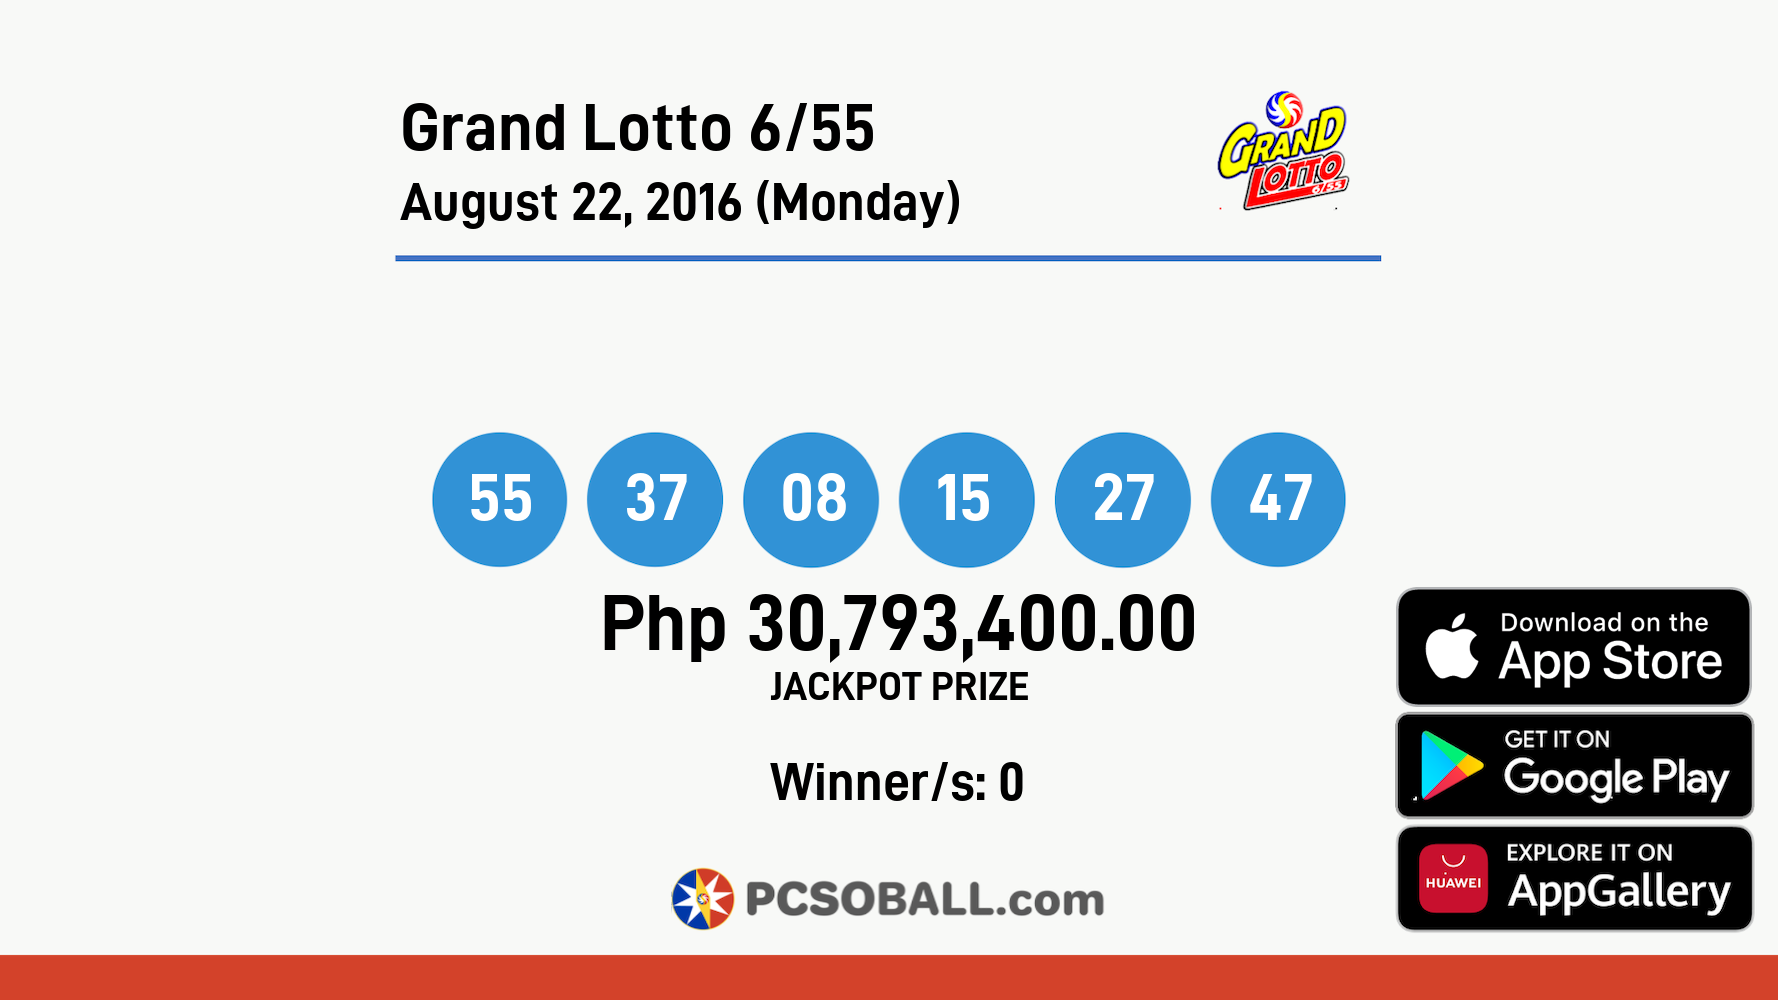 Grand Lotto 6/55 August 22, 2016 (Monday) Result